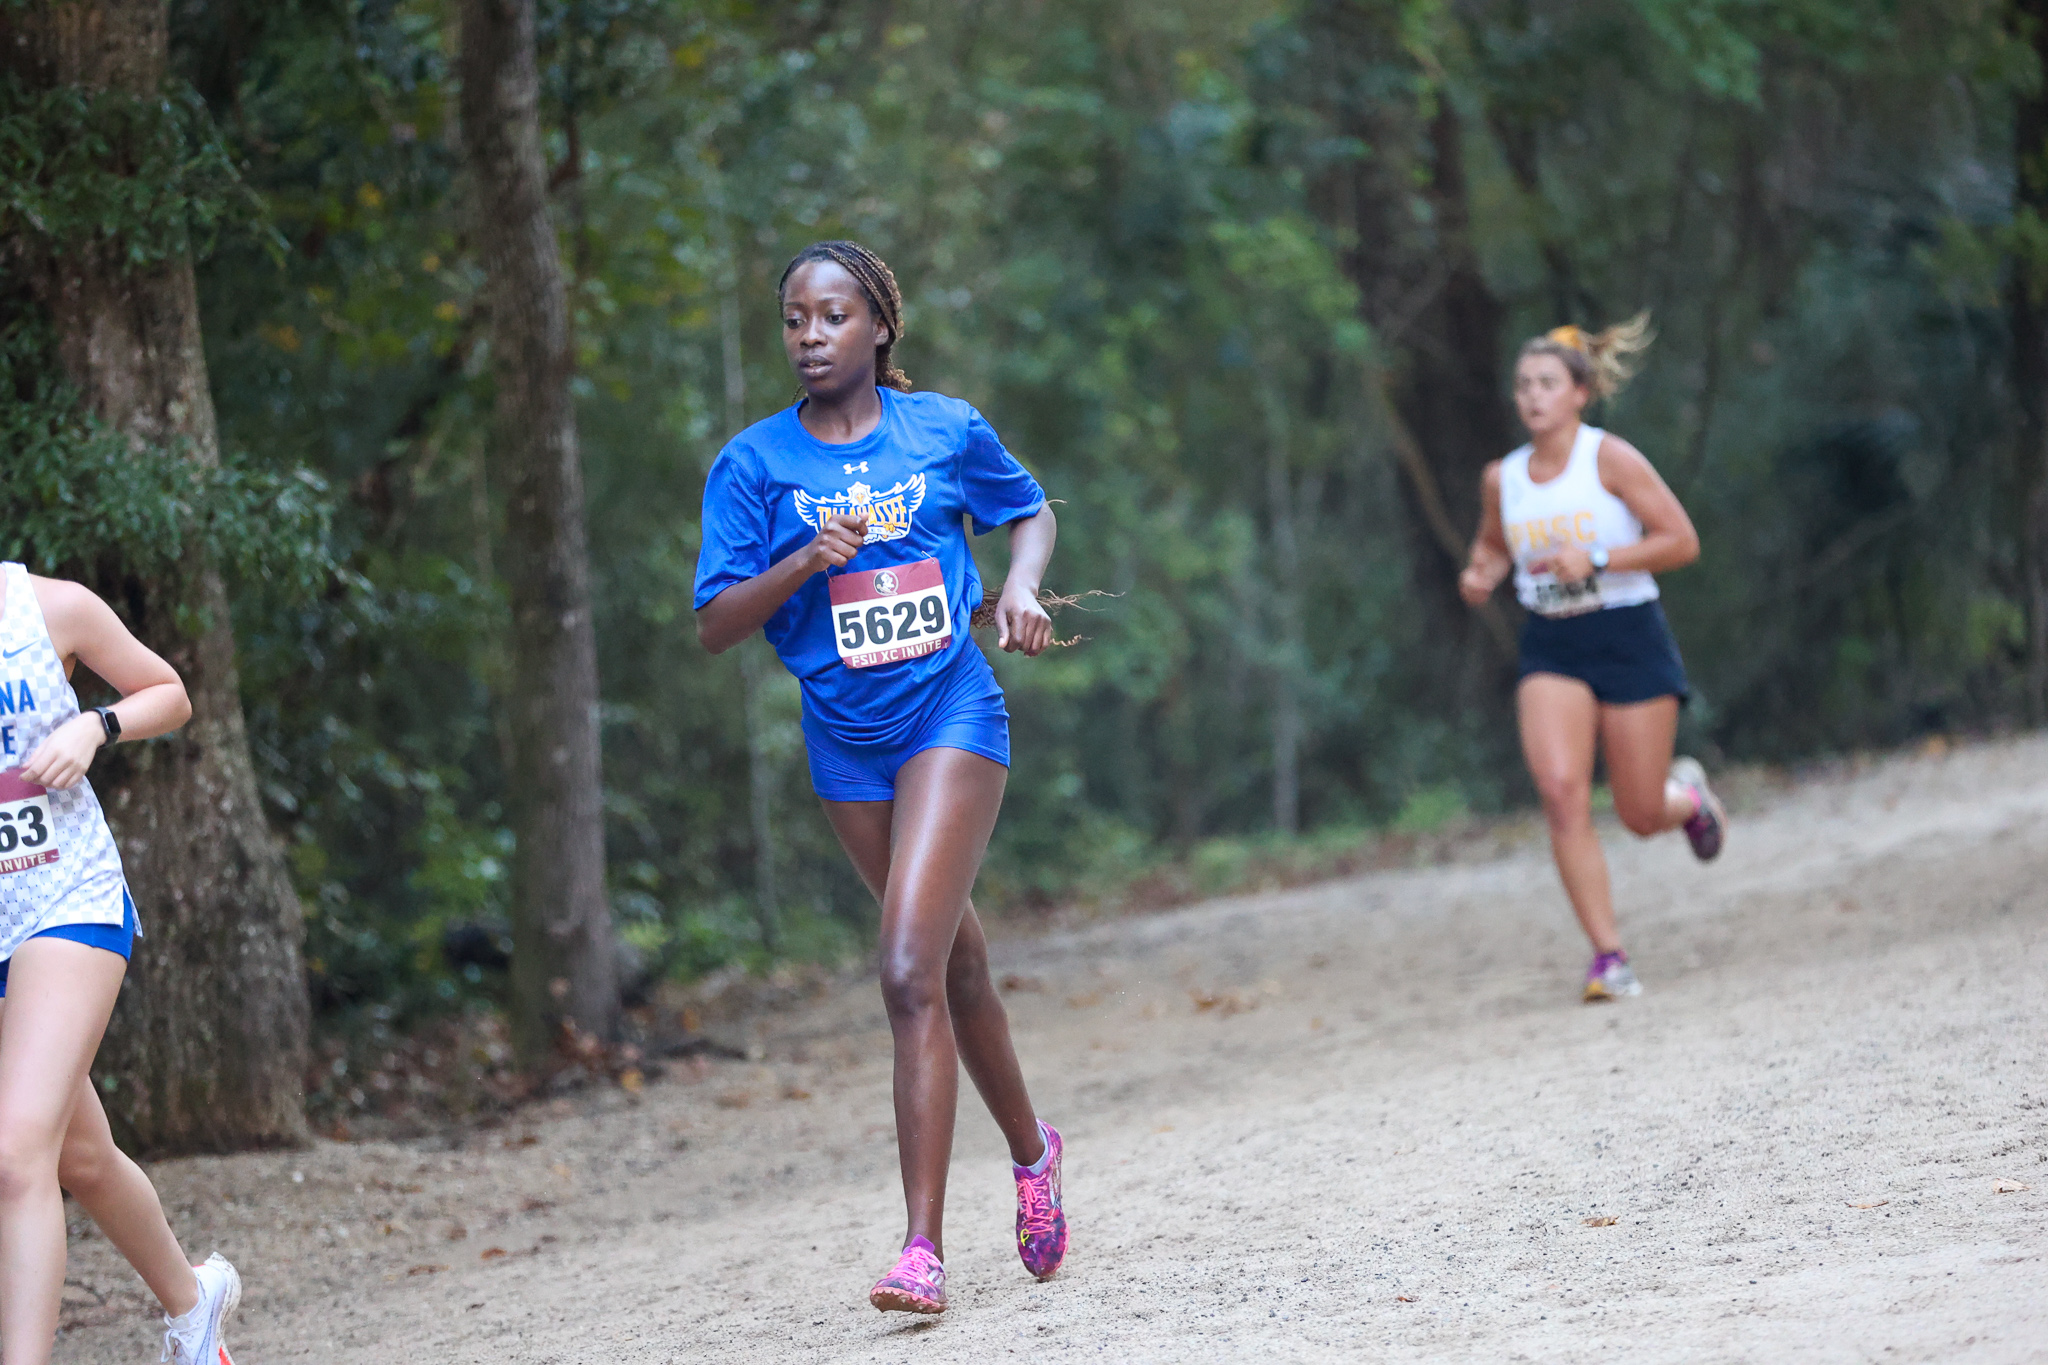 Merlica Faustin competing at the FSU Cross Country Open. (Photo credits: Christa Salerno, FSU Sports Information)